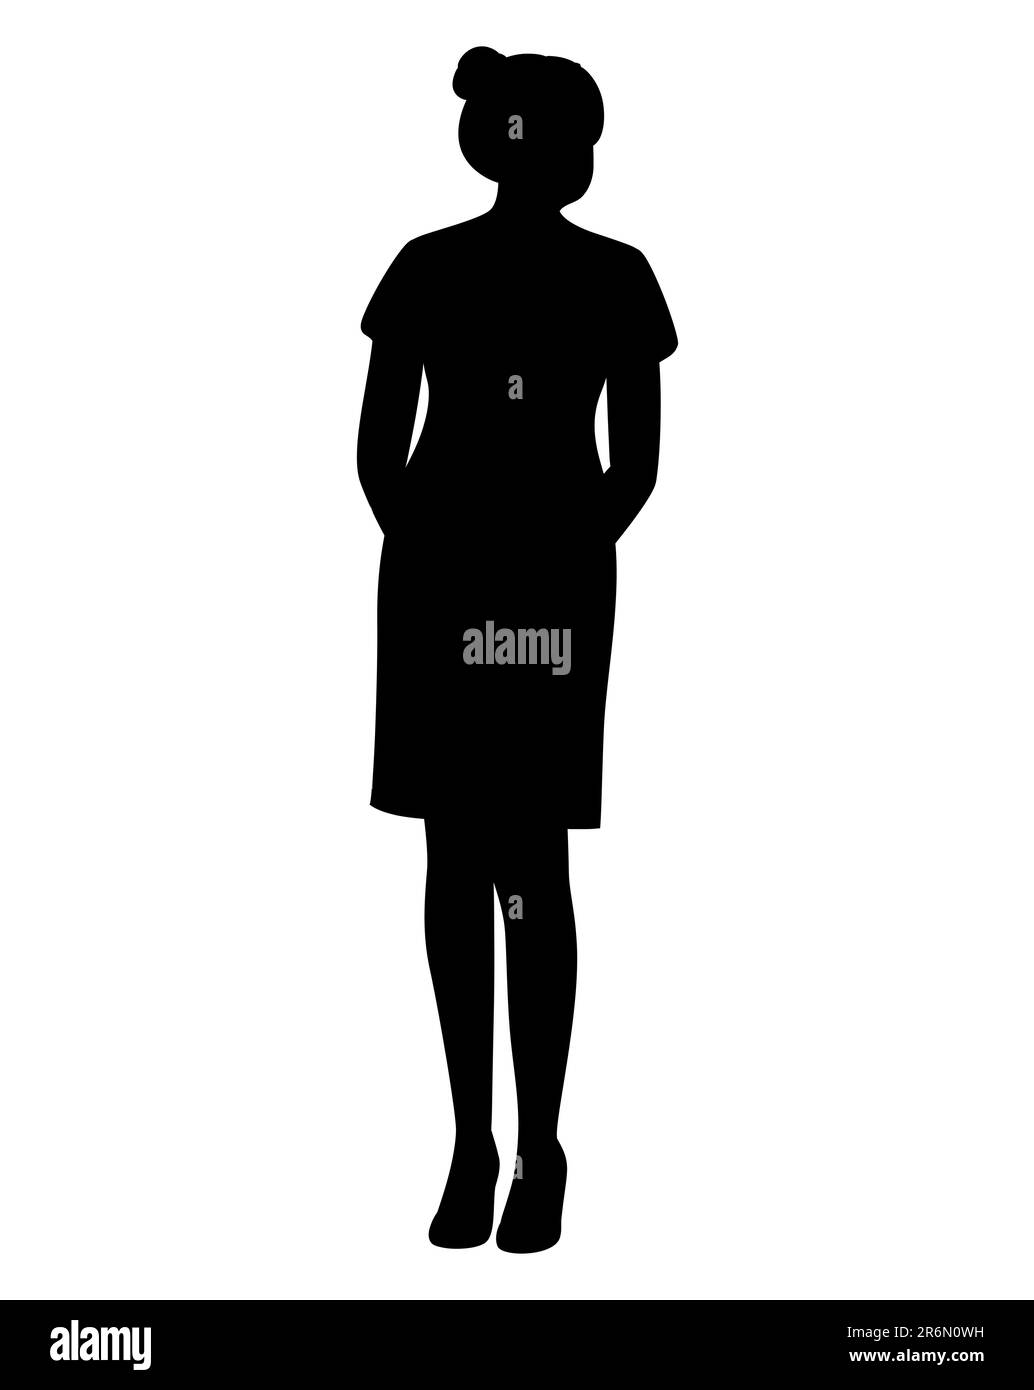 Black silhouette of a housewife in a dress standing with a high bun hairstyle, beautiful woman vector eps Stock Vector